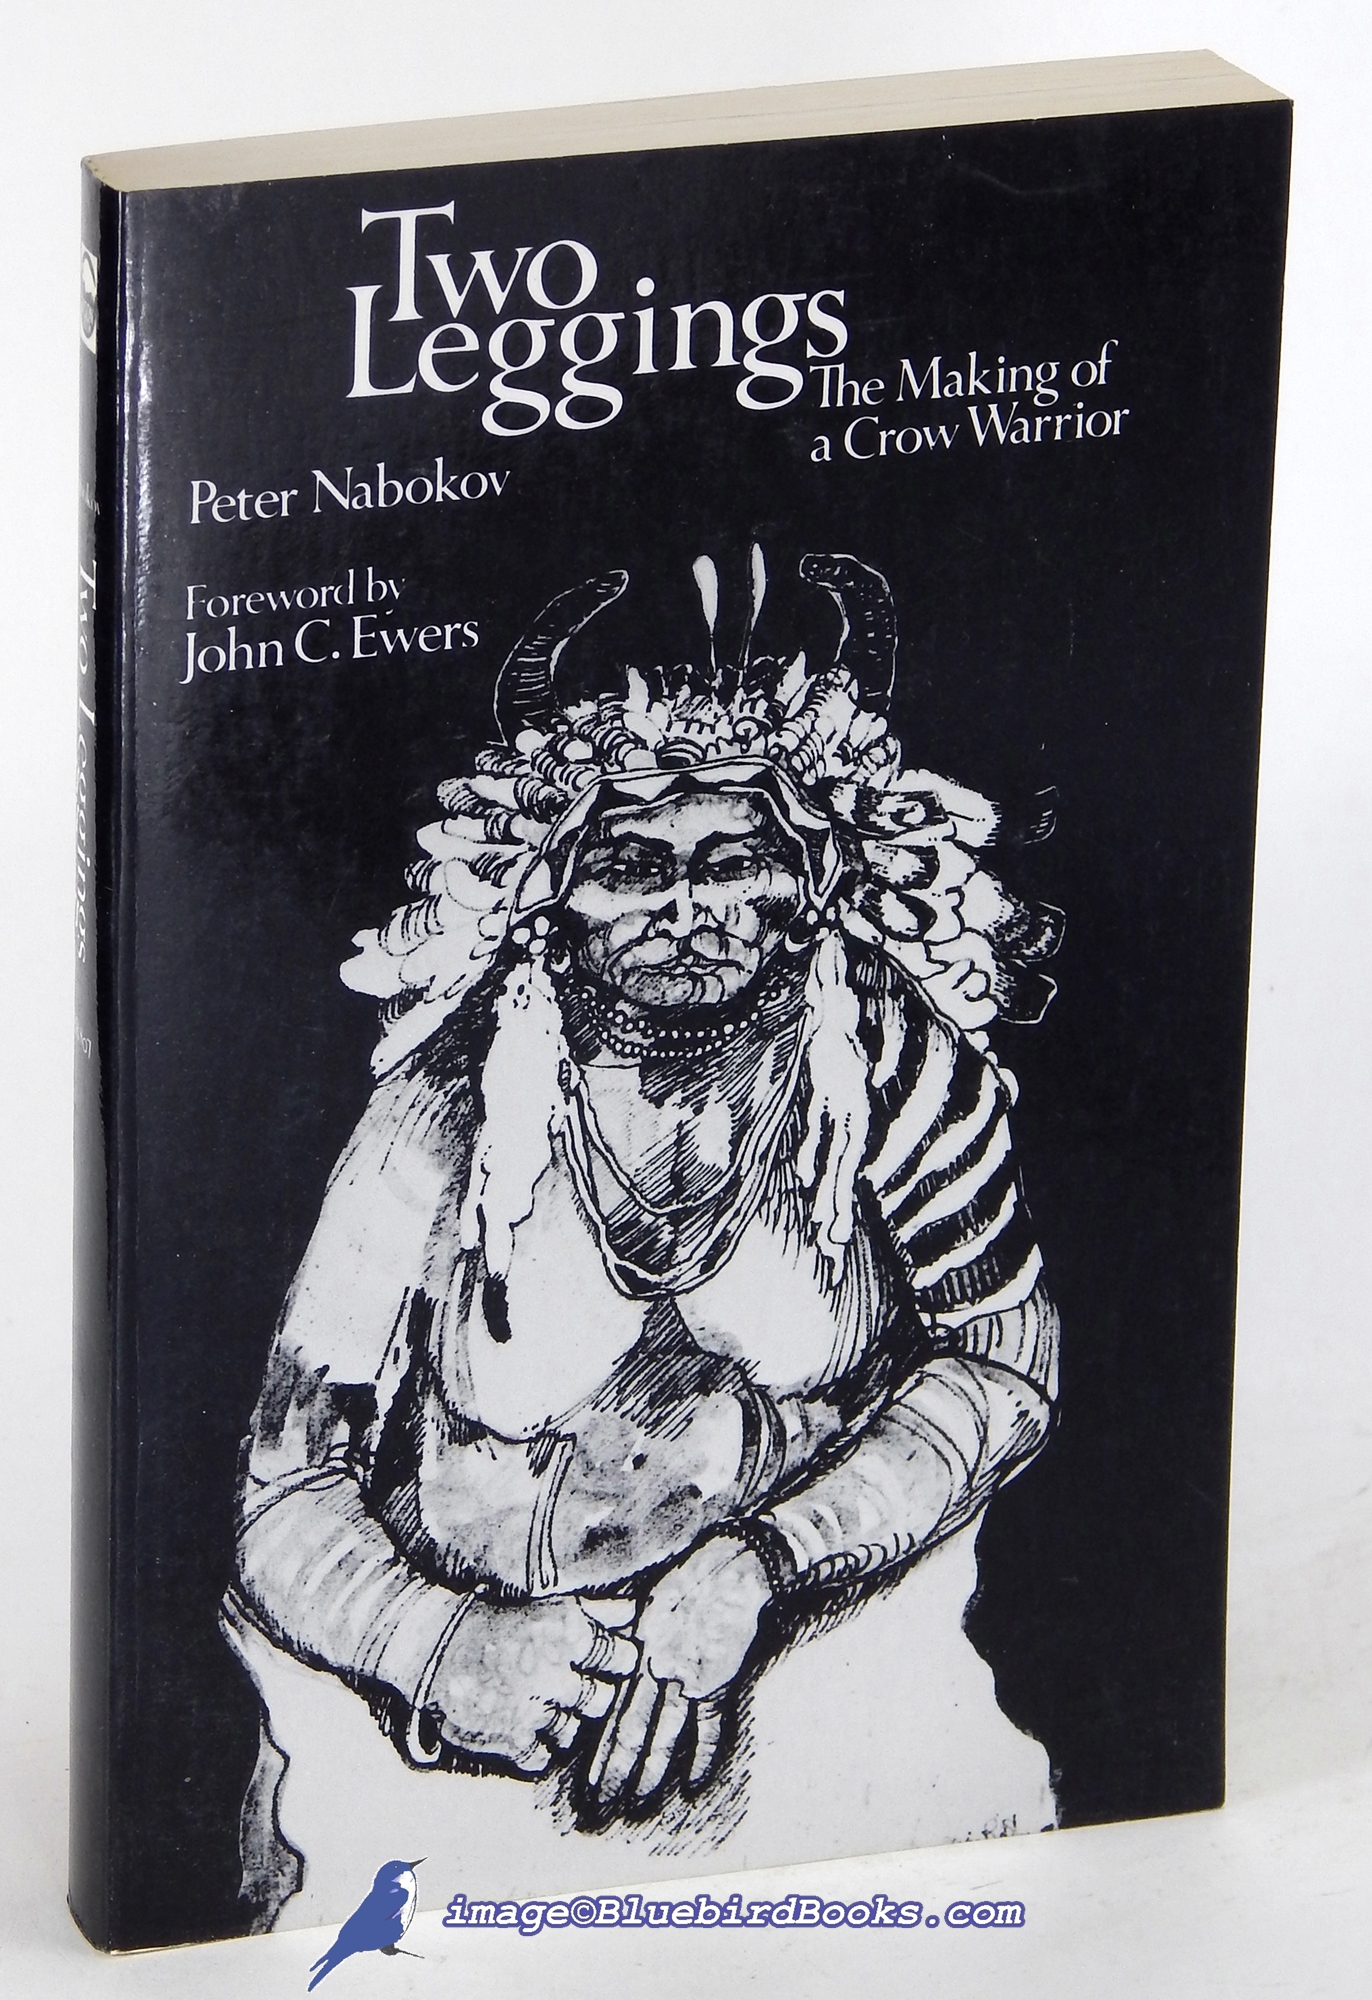 NABOKOV, PETER - Two Leggings: The Making of a Crow Warrior